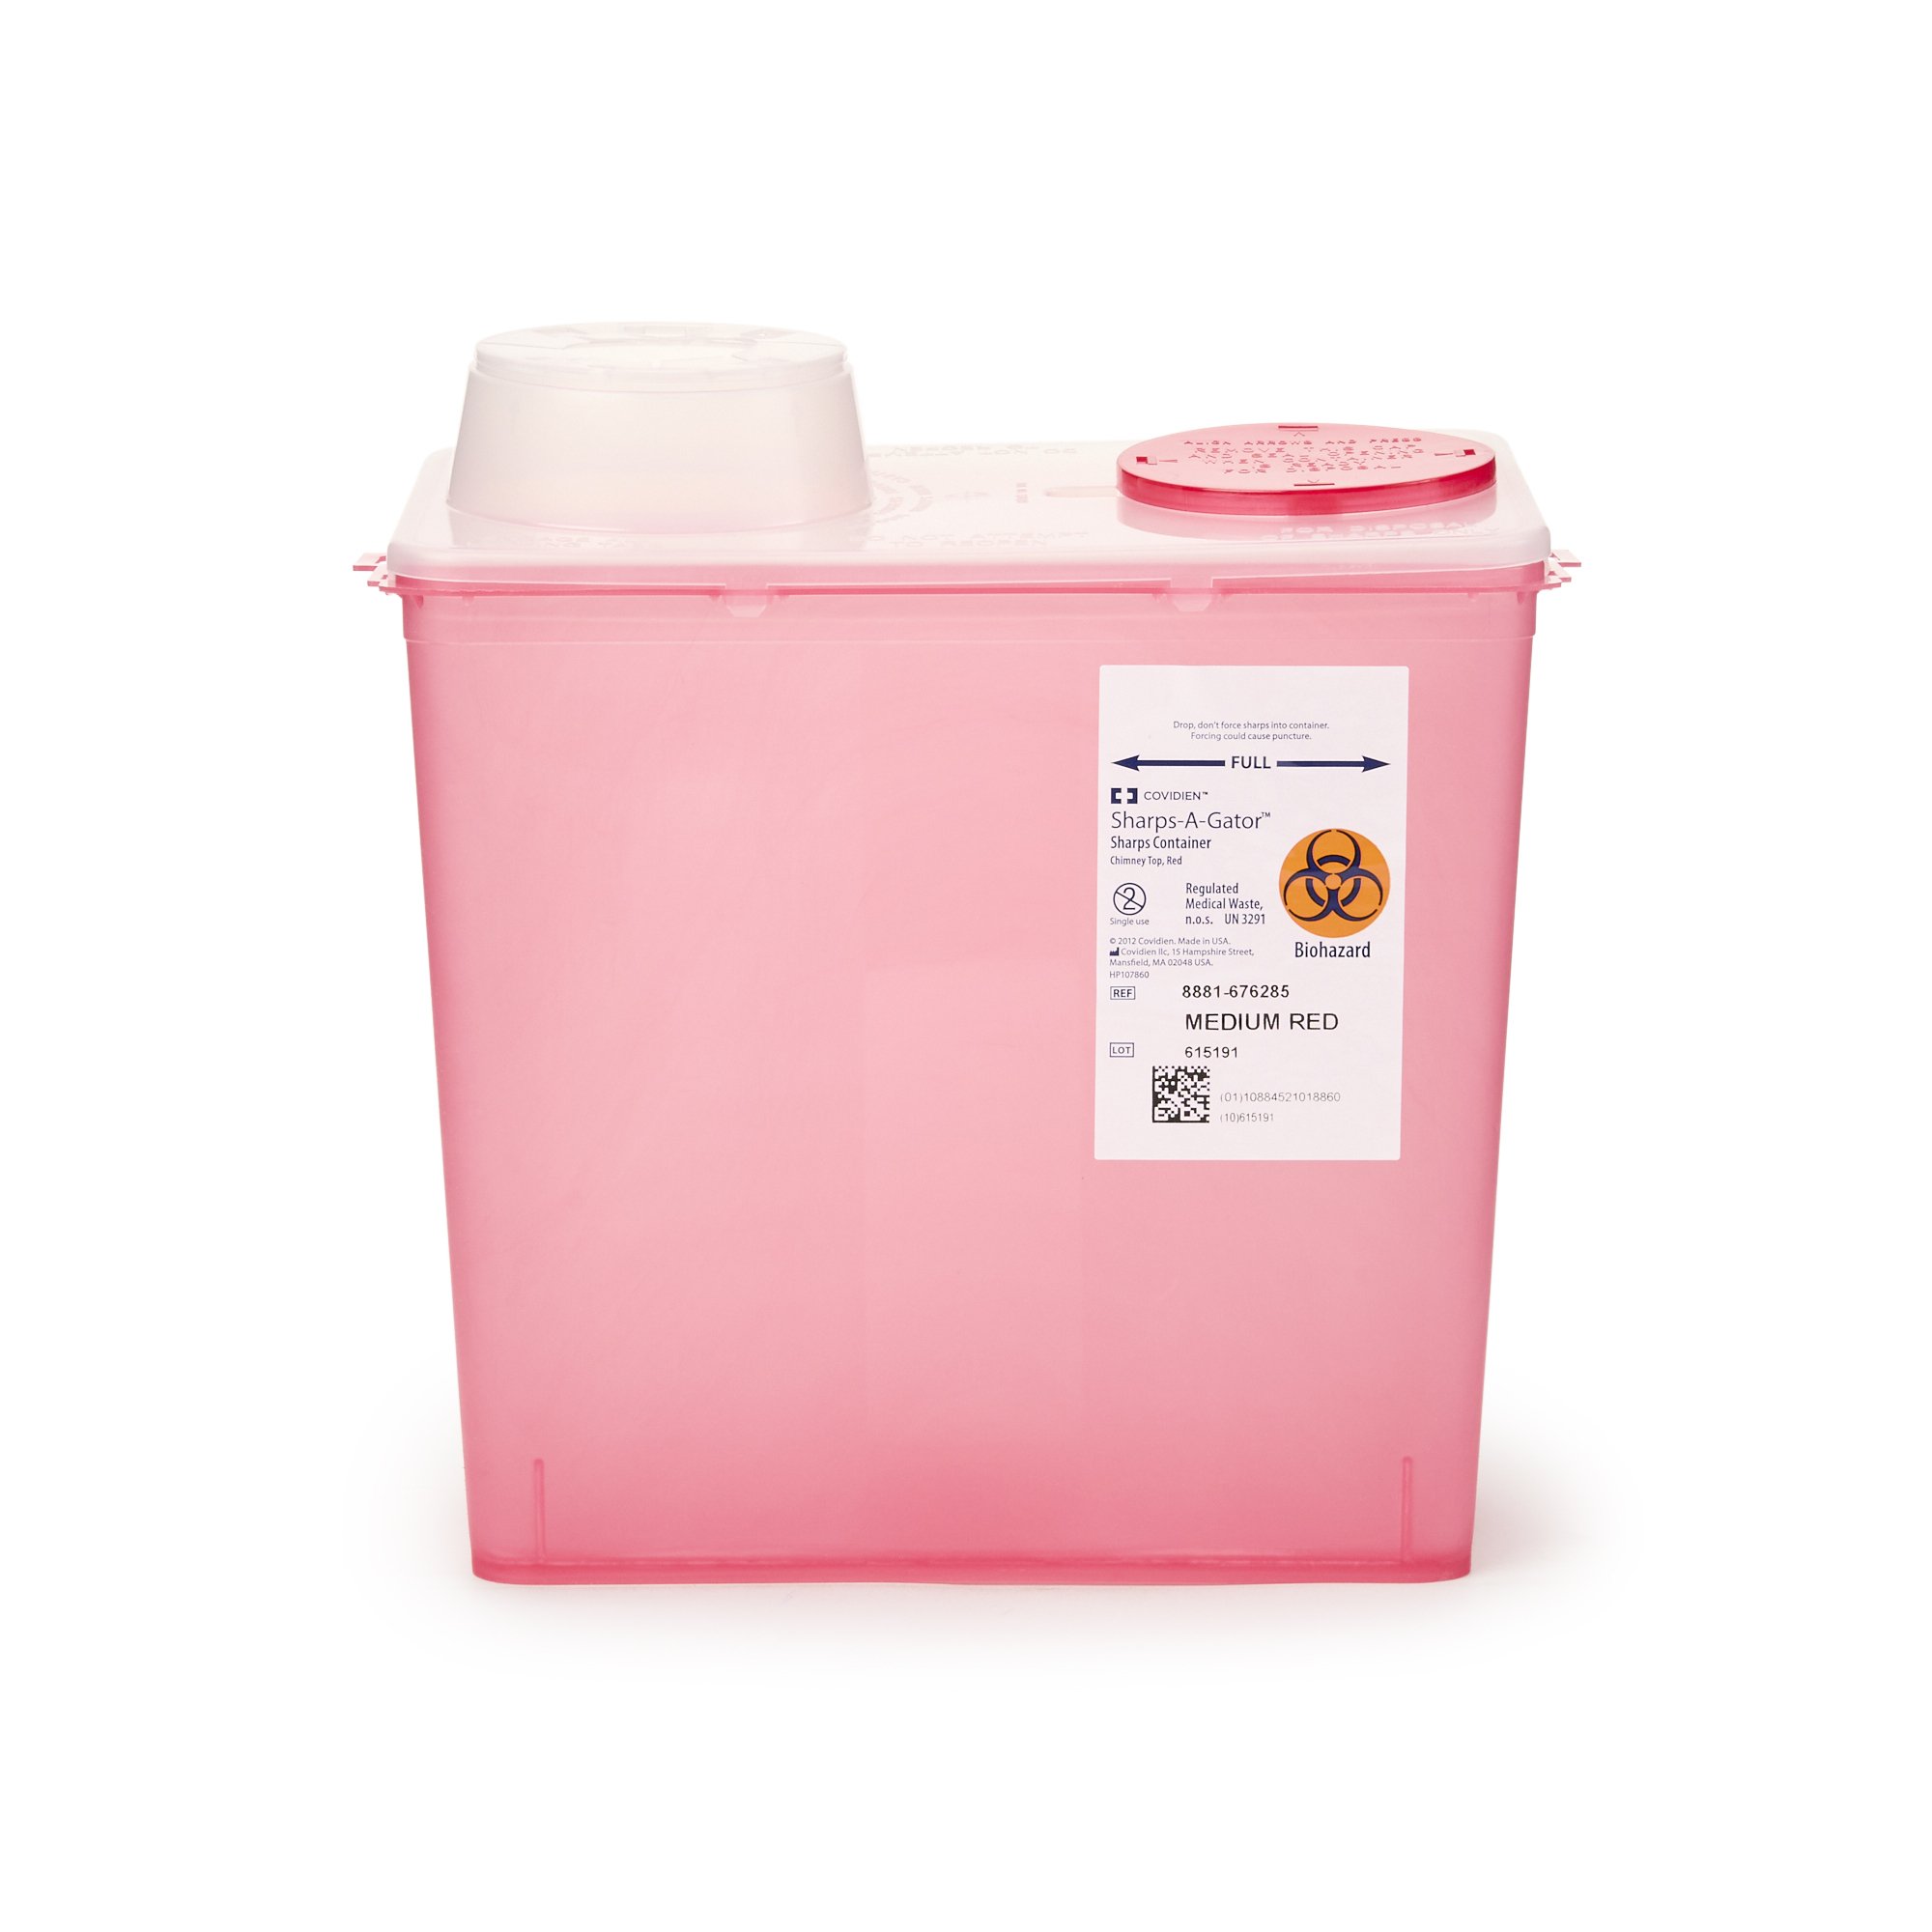 Sharps Container Monoject™ 10-9/10 H X 10-1/2 W  .. .  .  